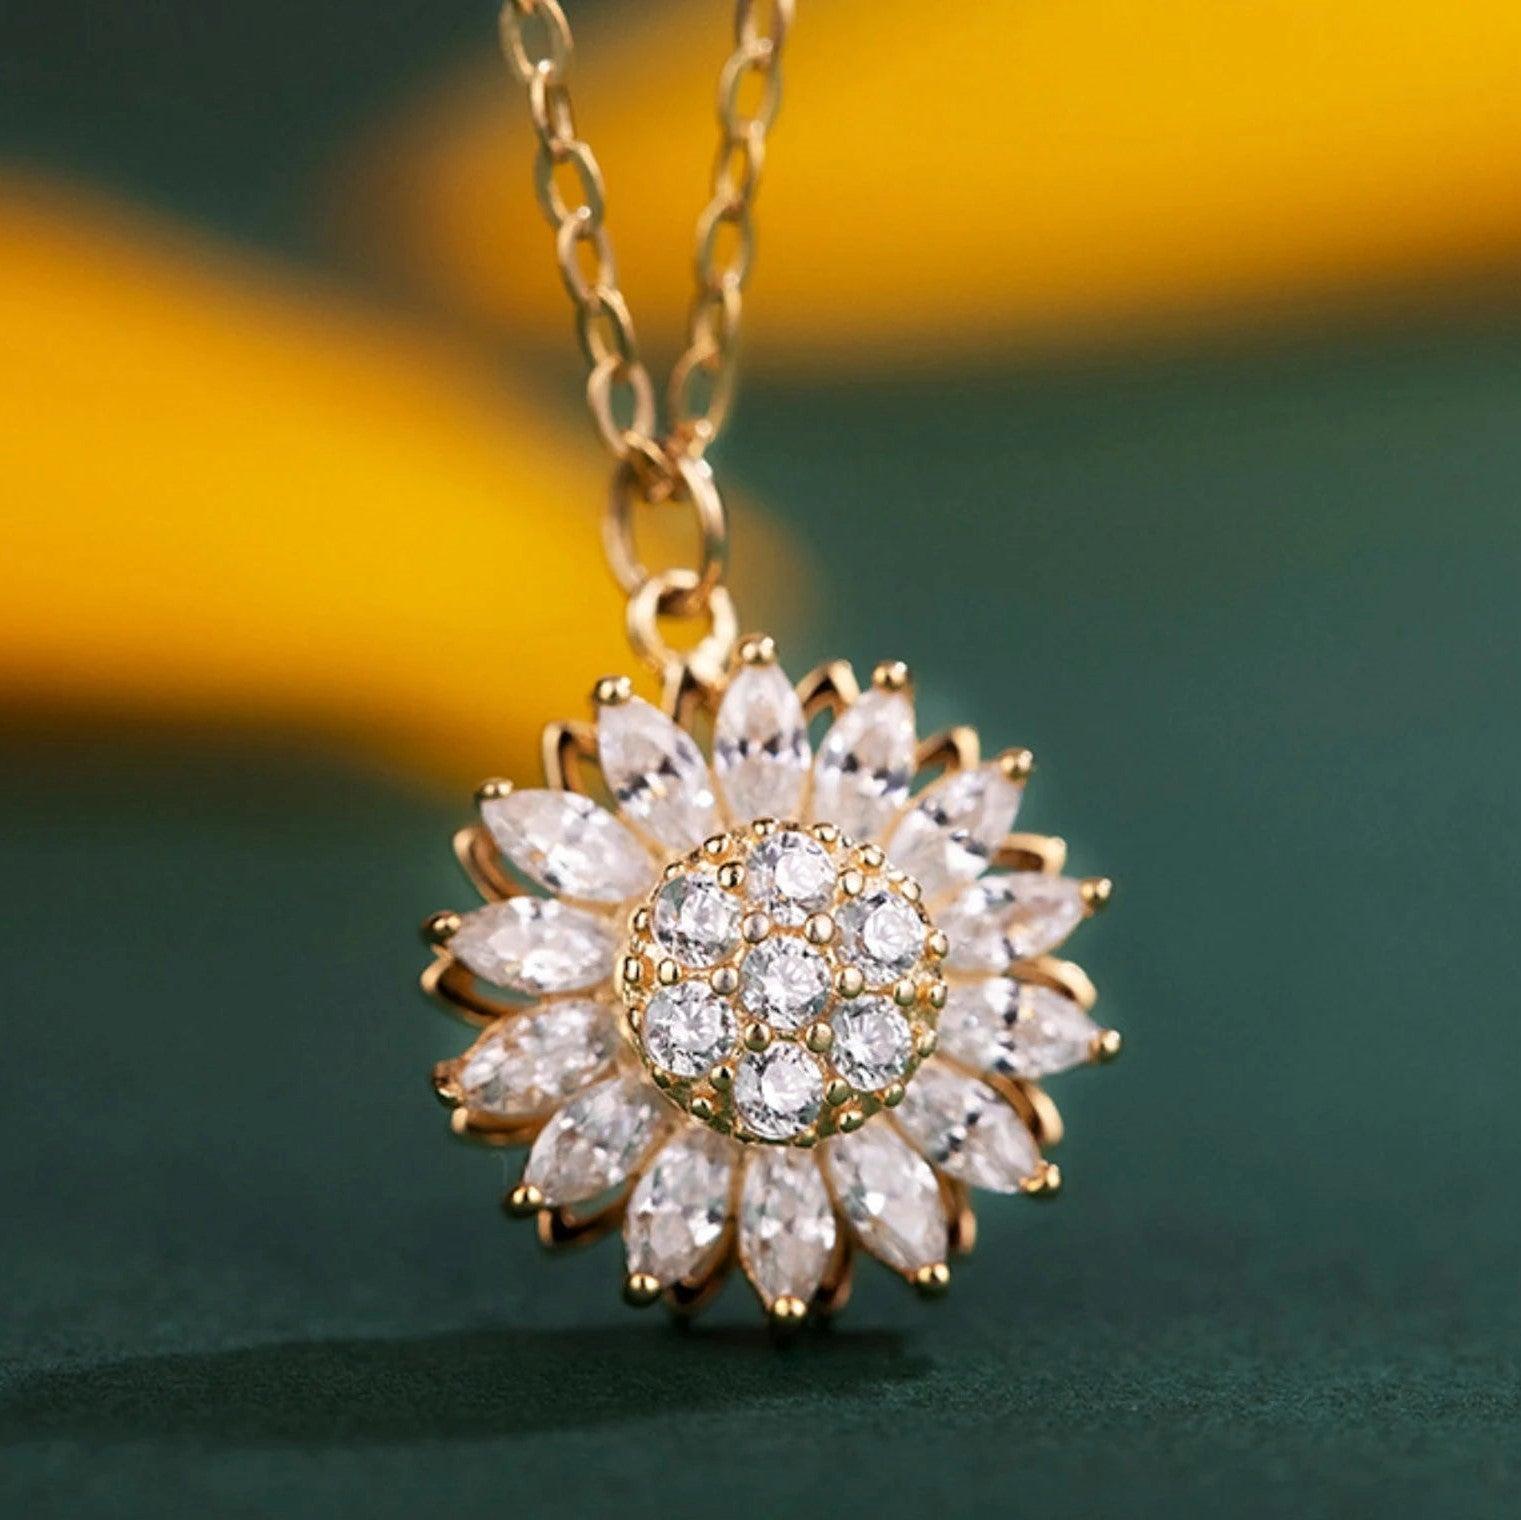 3CT Moissanite Sunflower Pendant Necklace 18K Yellow Gold Plated D Color  Diamond | eBay